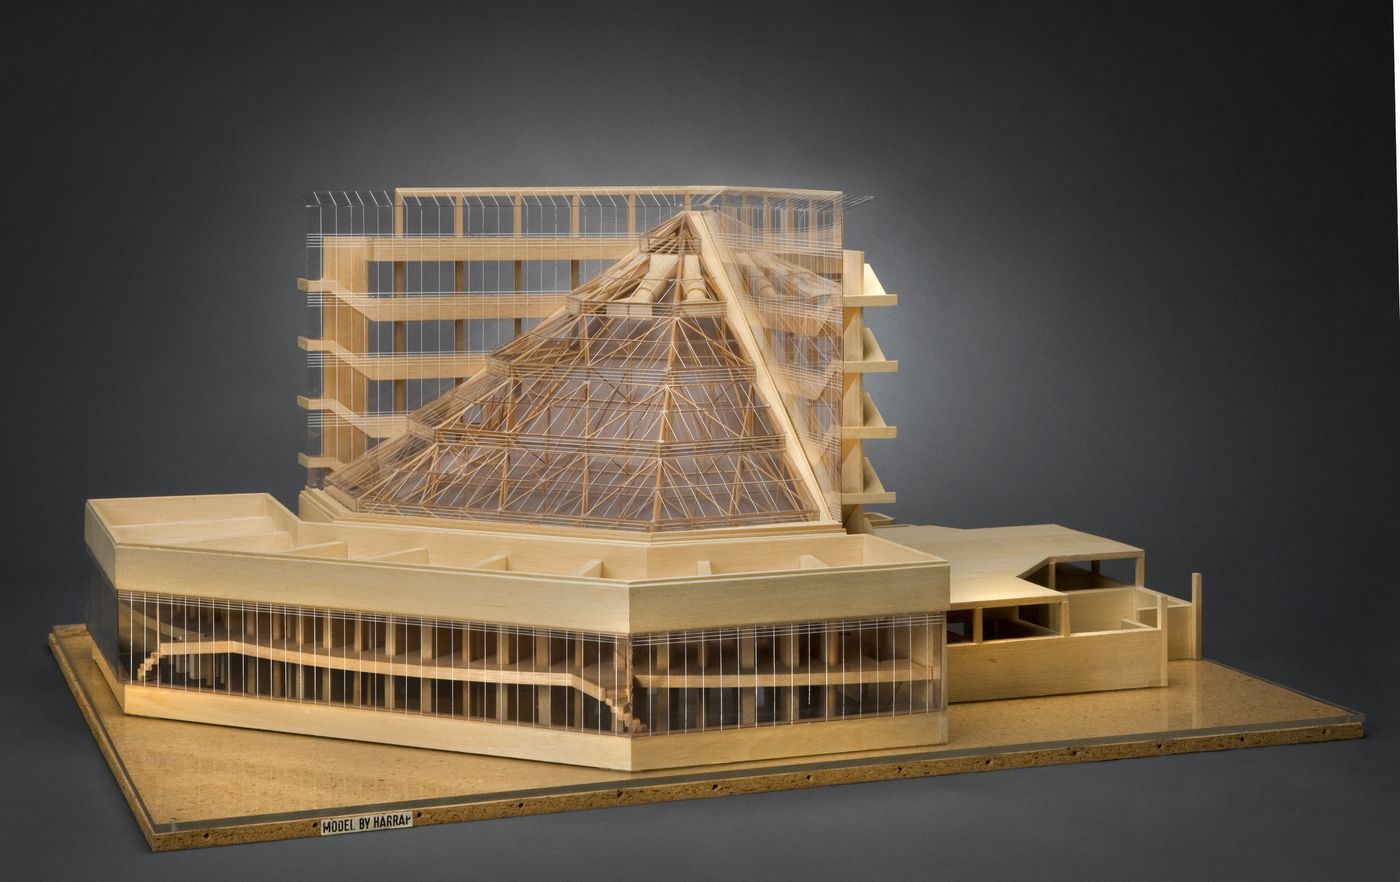 Presentation model for the History Faculty Building, University of Cambridge, displayed in the exhibition Architecture I (1977) at Leo Castelli Gallery